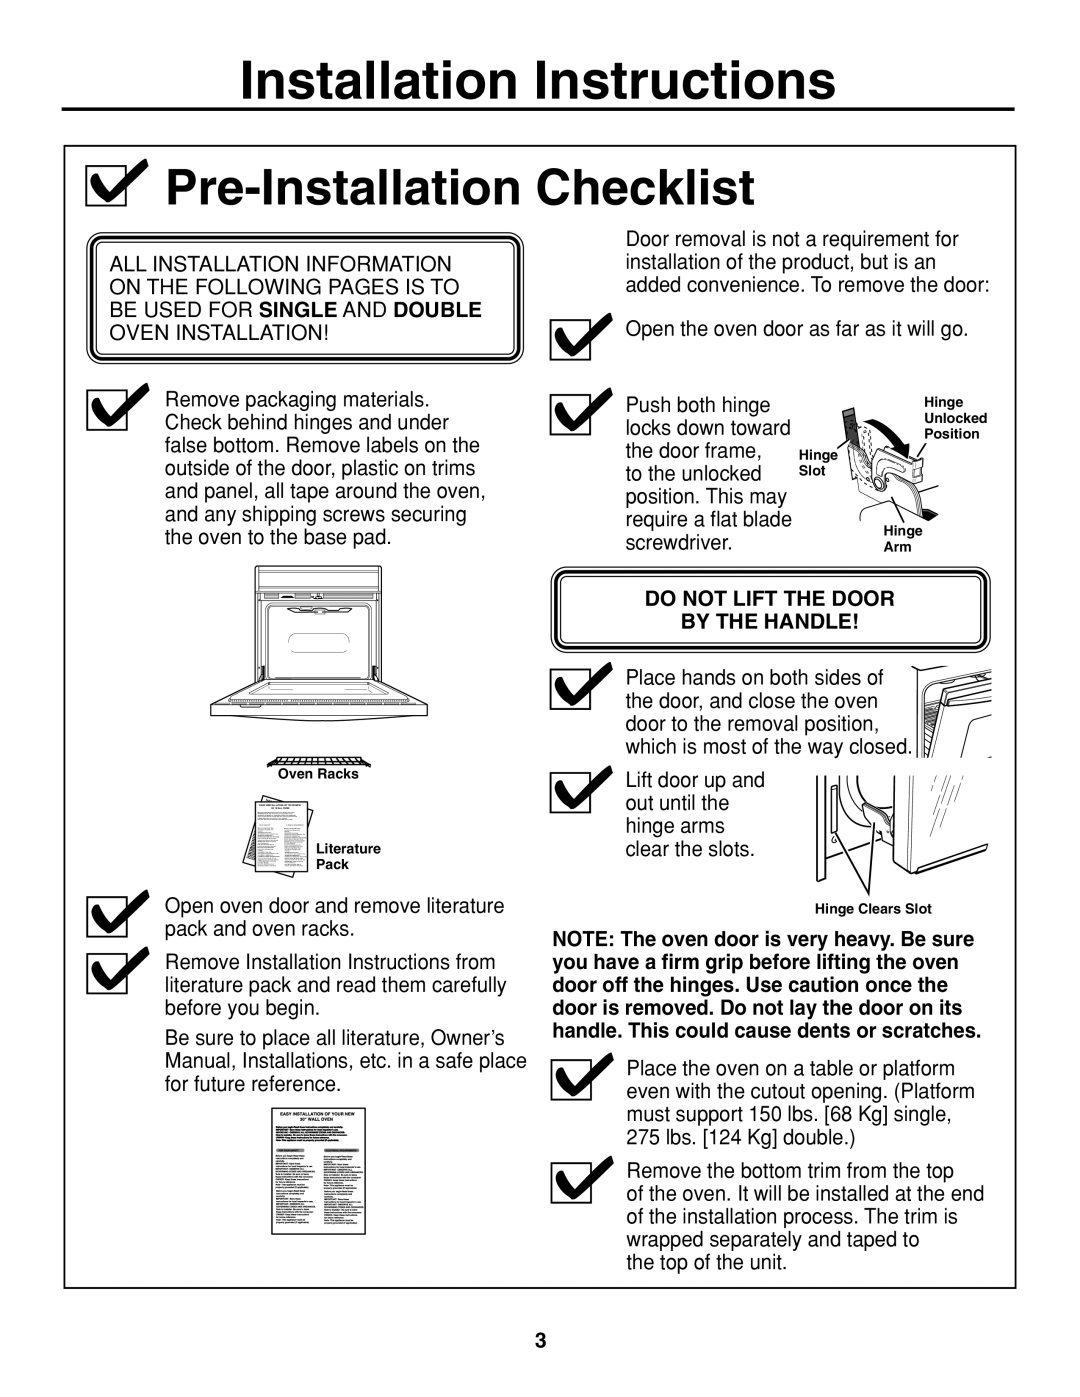 GE r08654v-1 Pre-Installation Checklist, Installation Instructions, Do Not Lift The Door By The Handle 